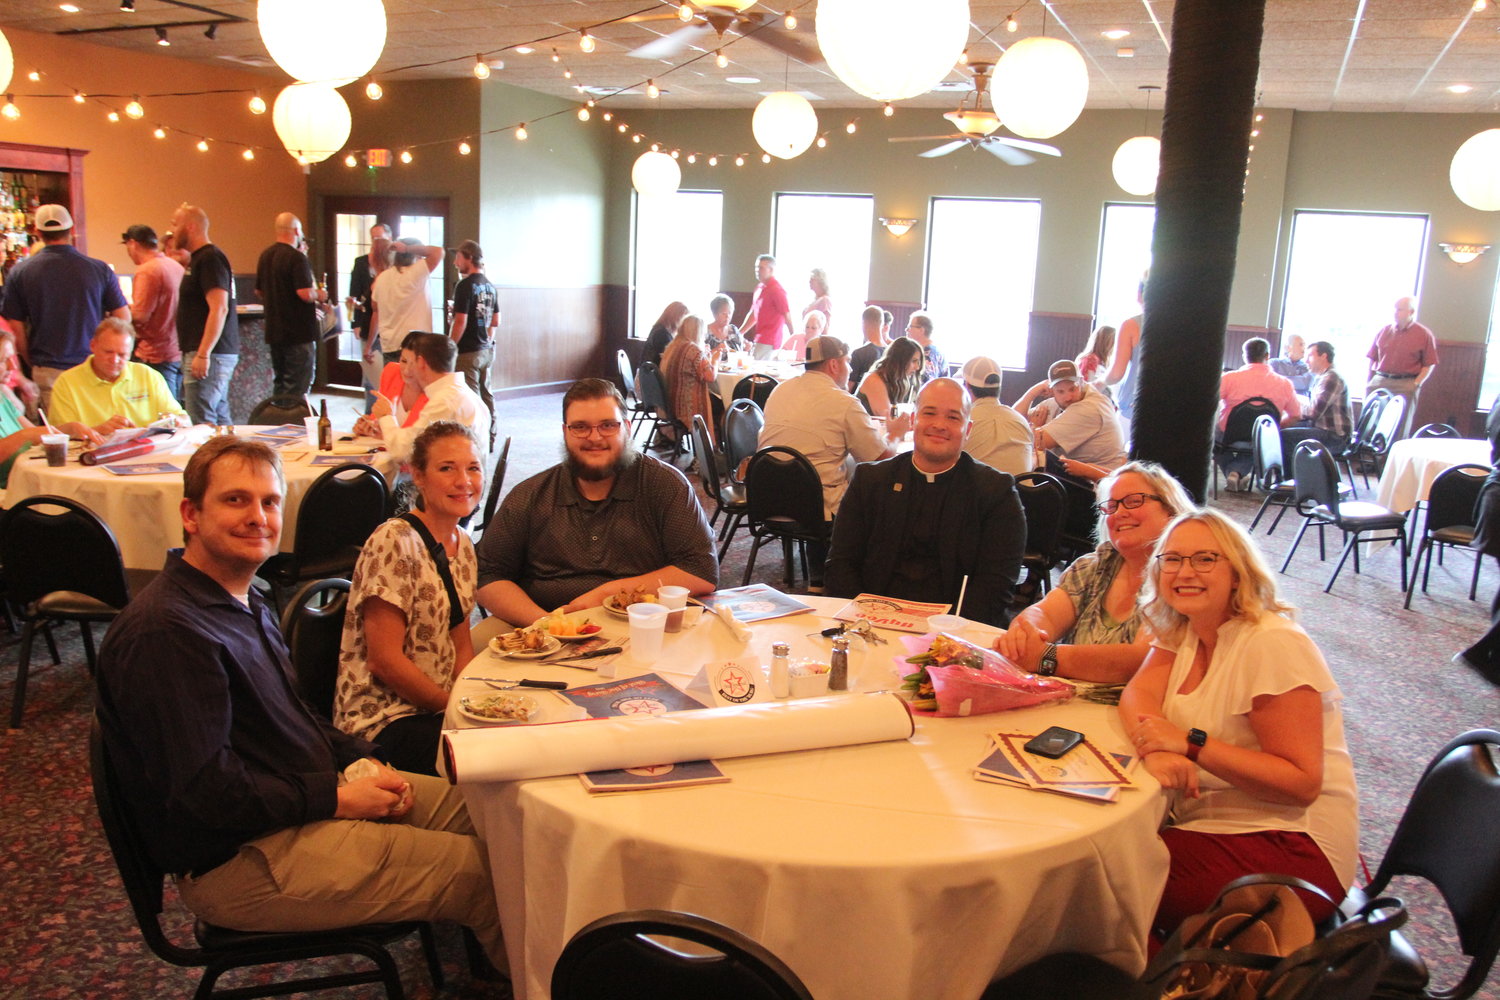 Best of the ‘Burg winners take part in the hors d'oeuvres during the reception Thursday, July 28, at PLAYERS Restaurant.